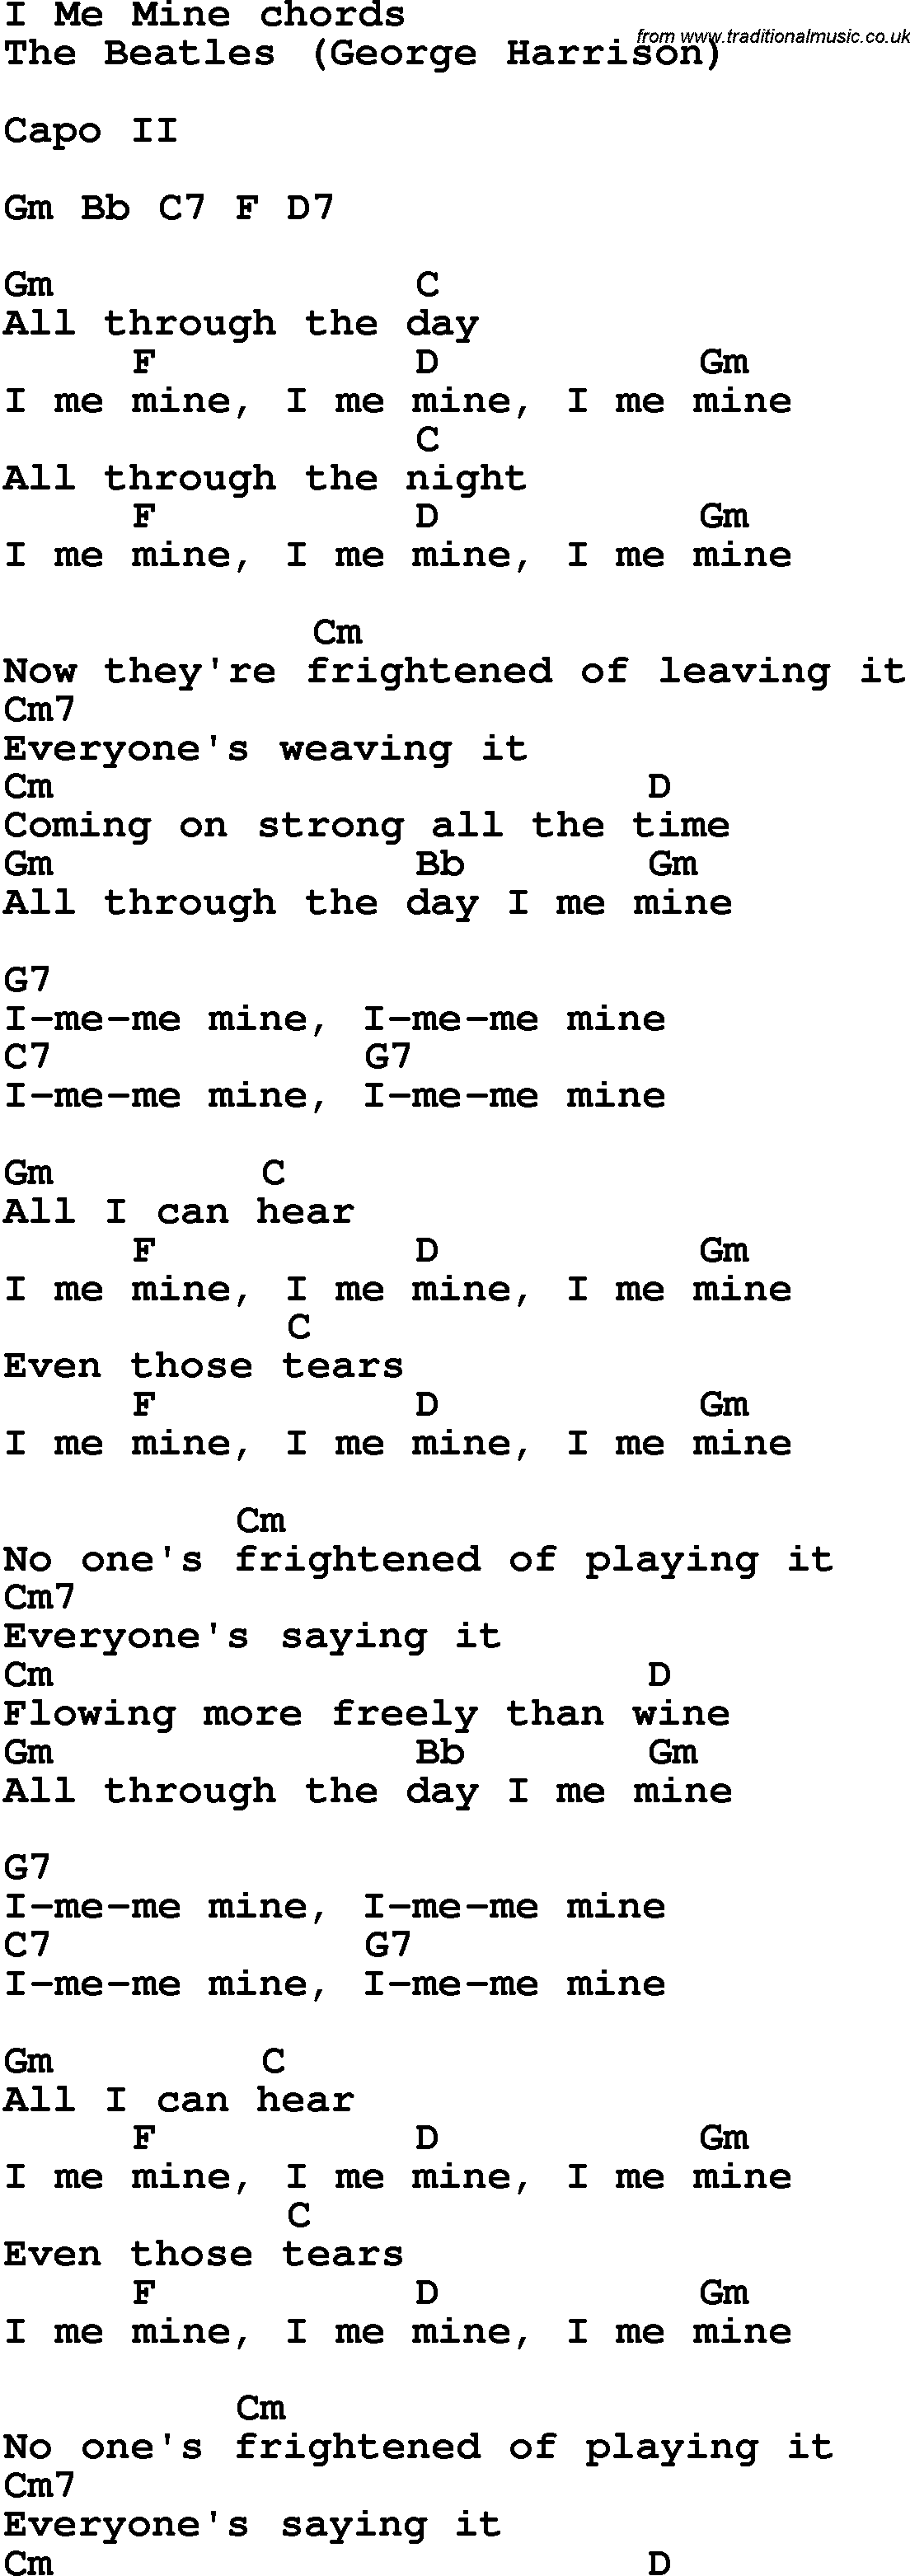 Song Lyrics with guitar chords for I Me Mine